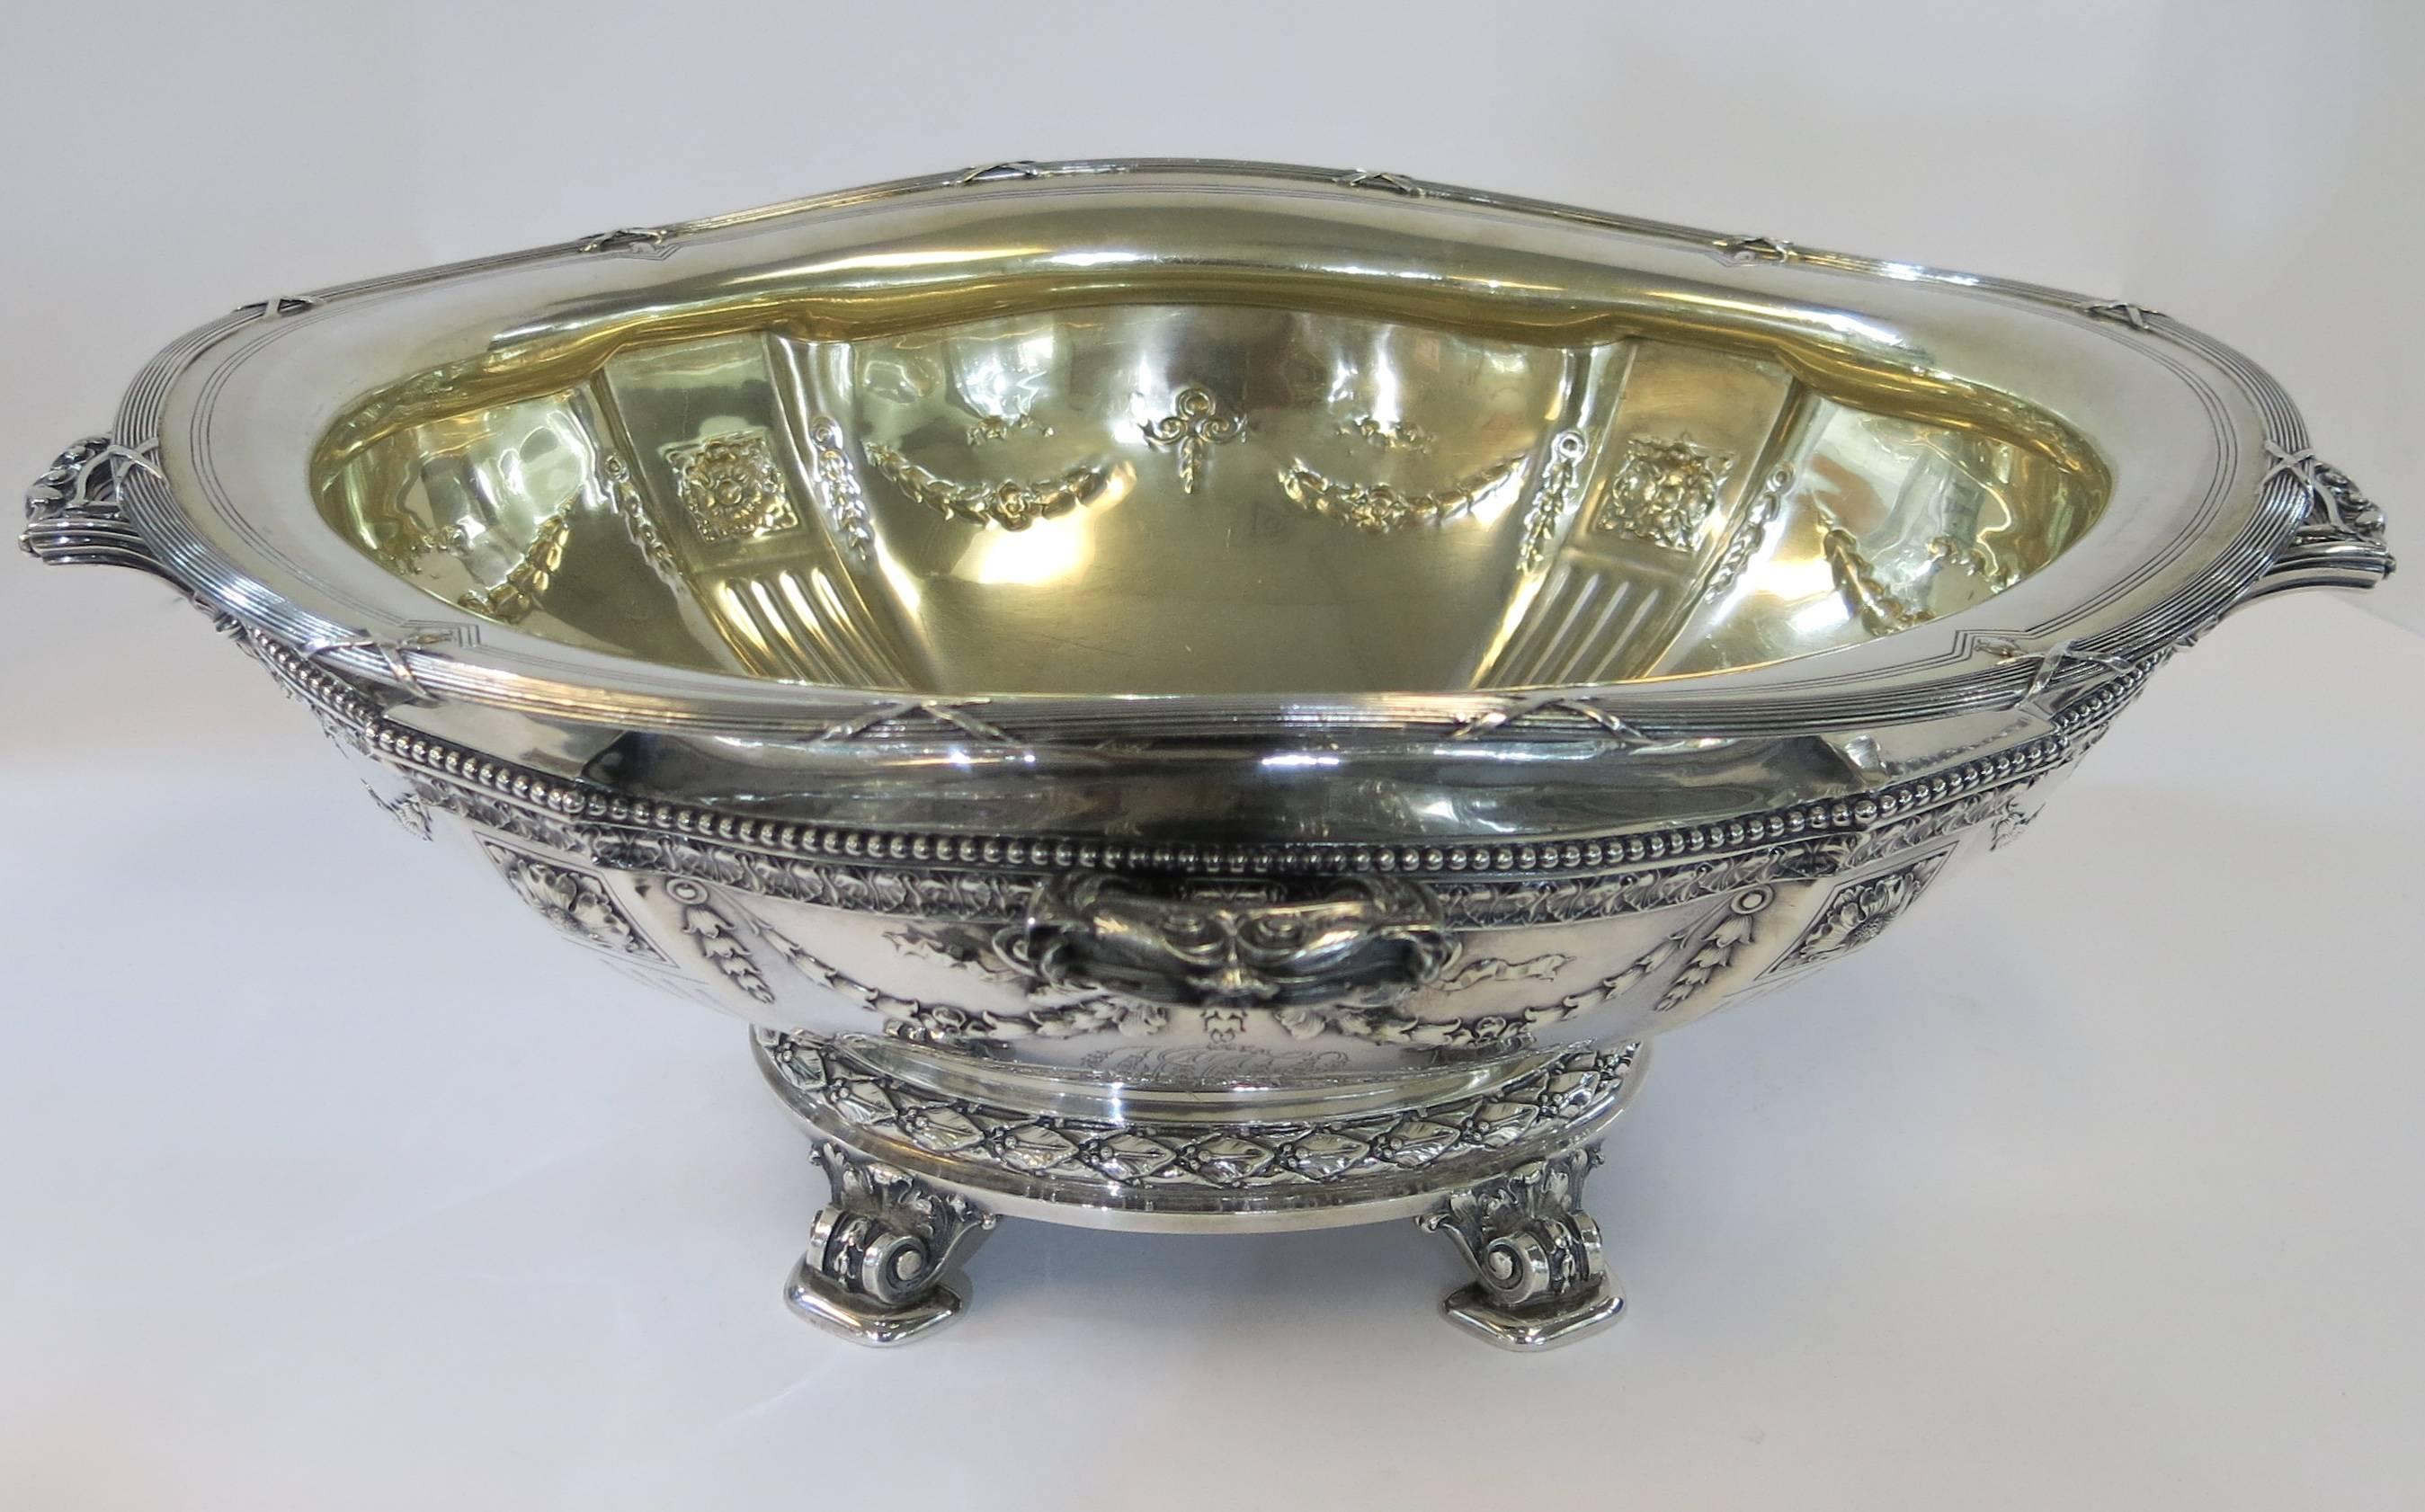 Early 20th Century Large Oval Antique Sterling Silver Centrepiece by Gorham